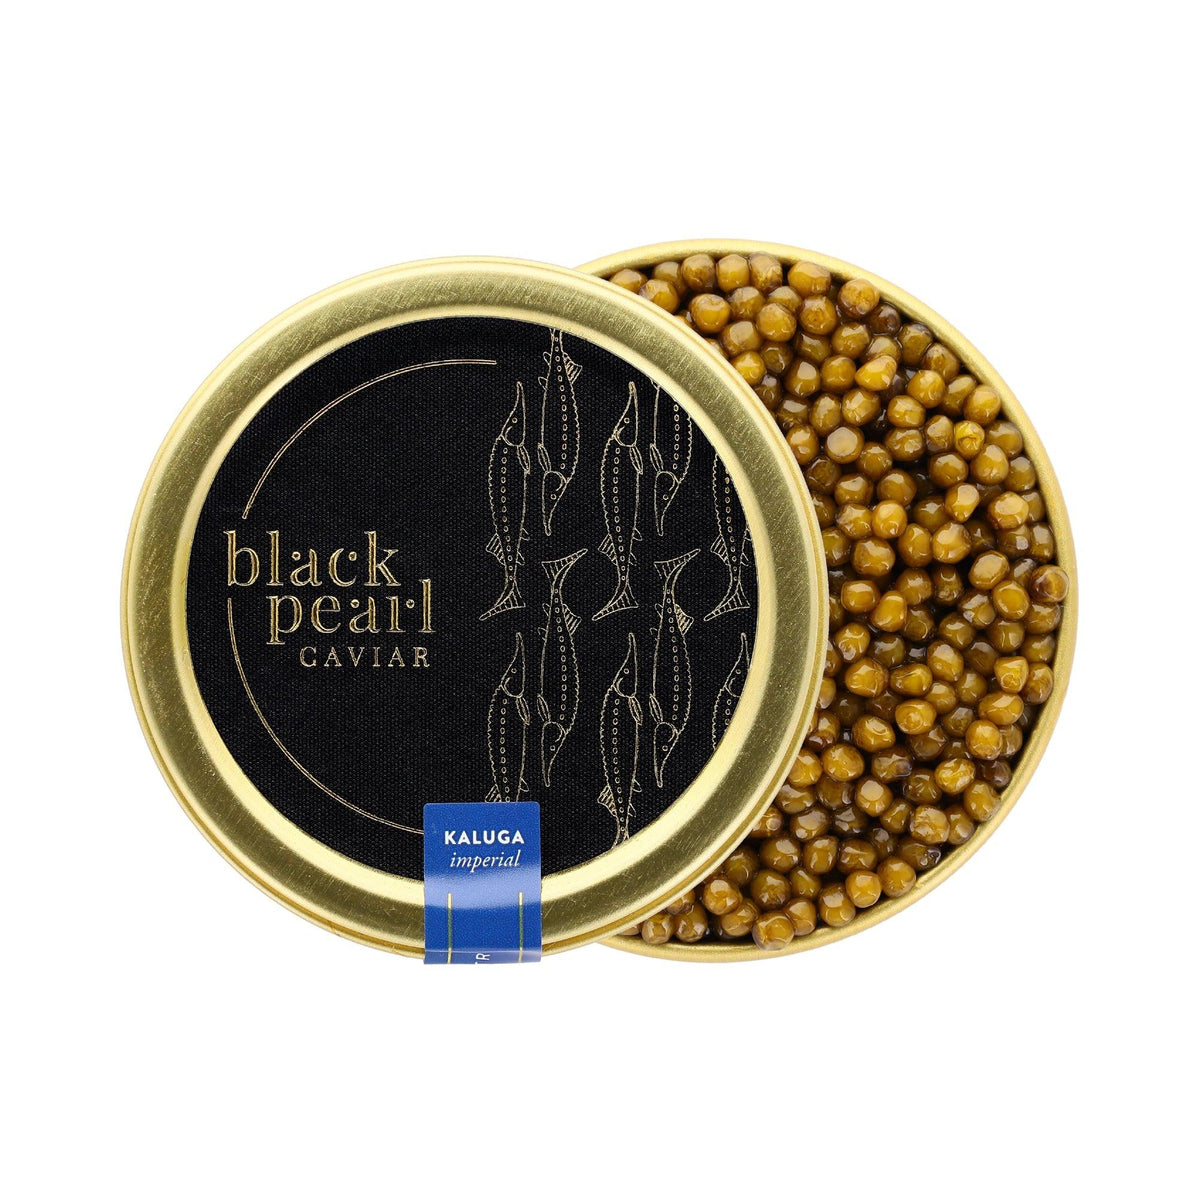 large caviar with mild nutty taste, intense brown to gold color, limited availability